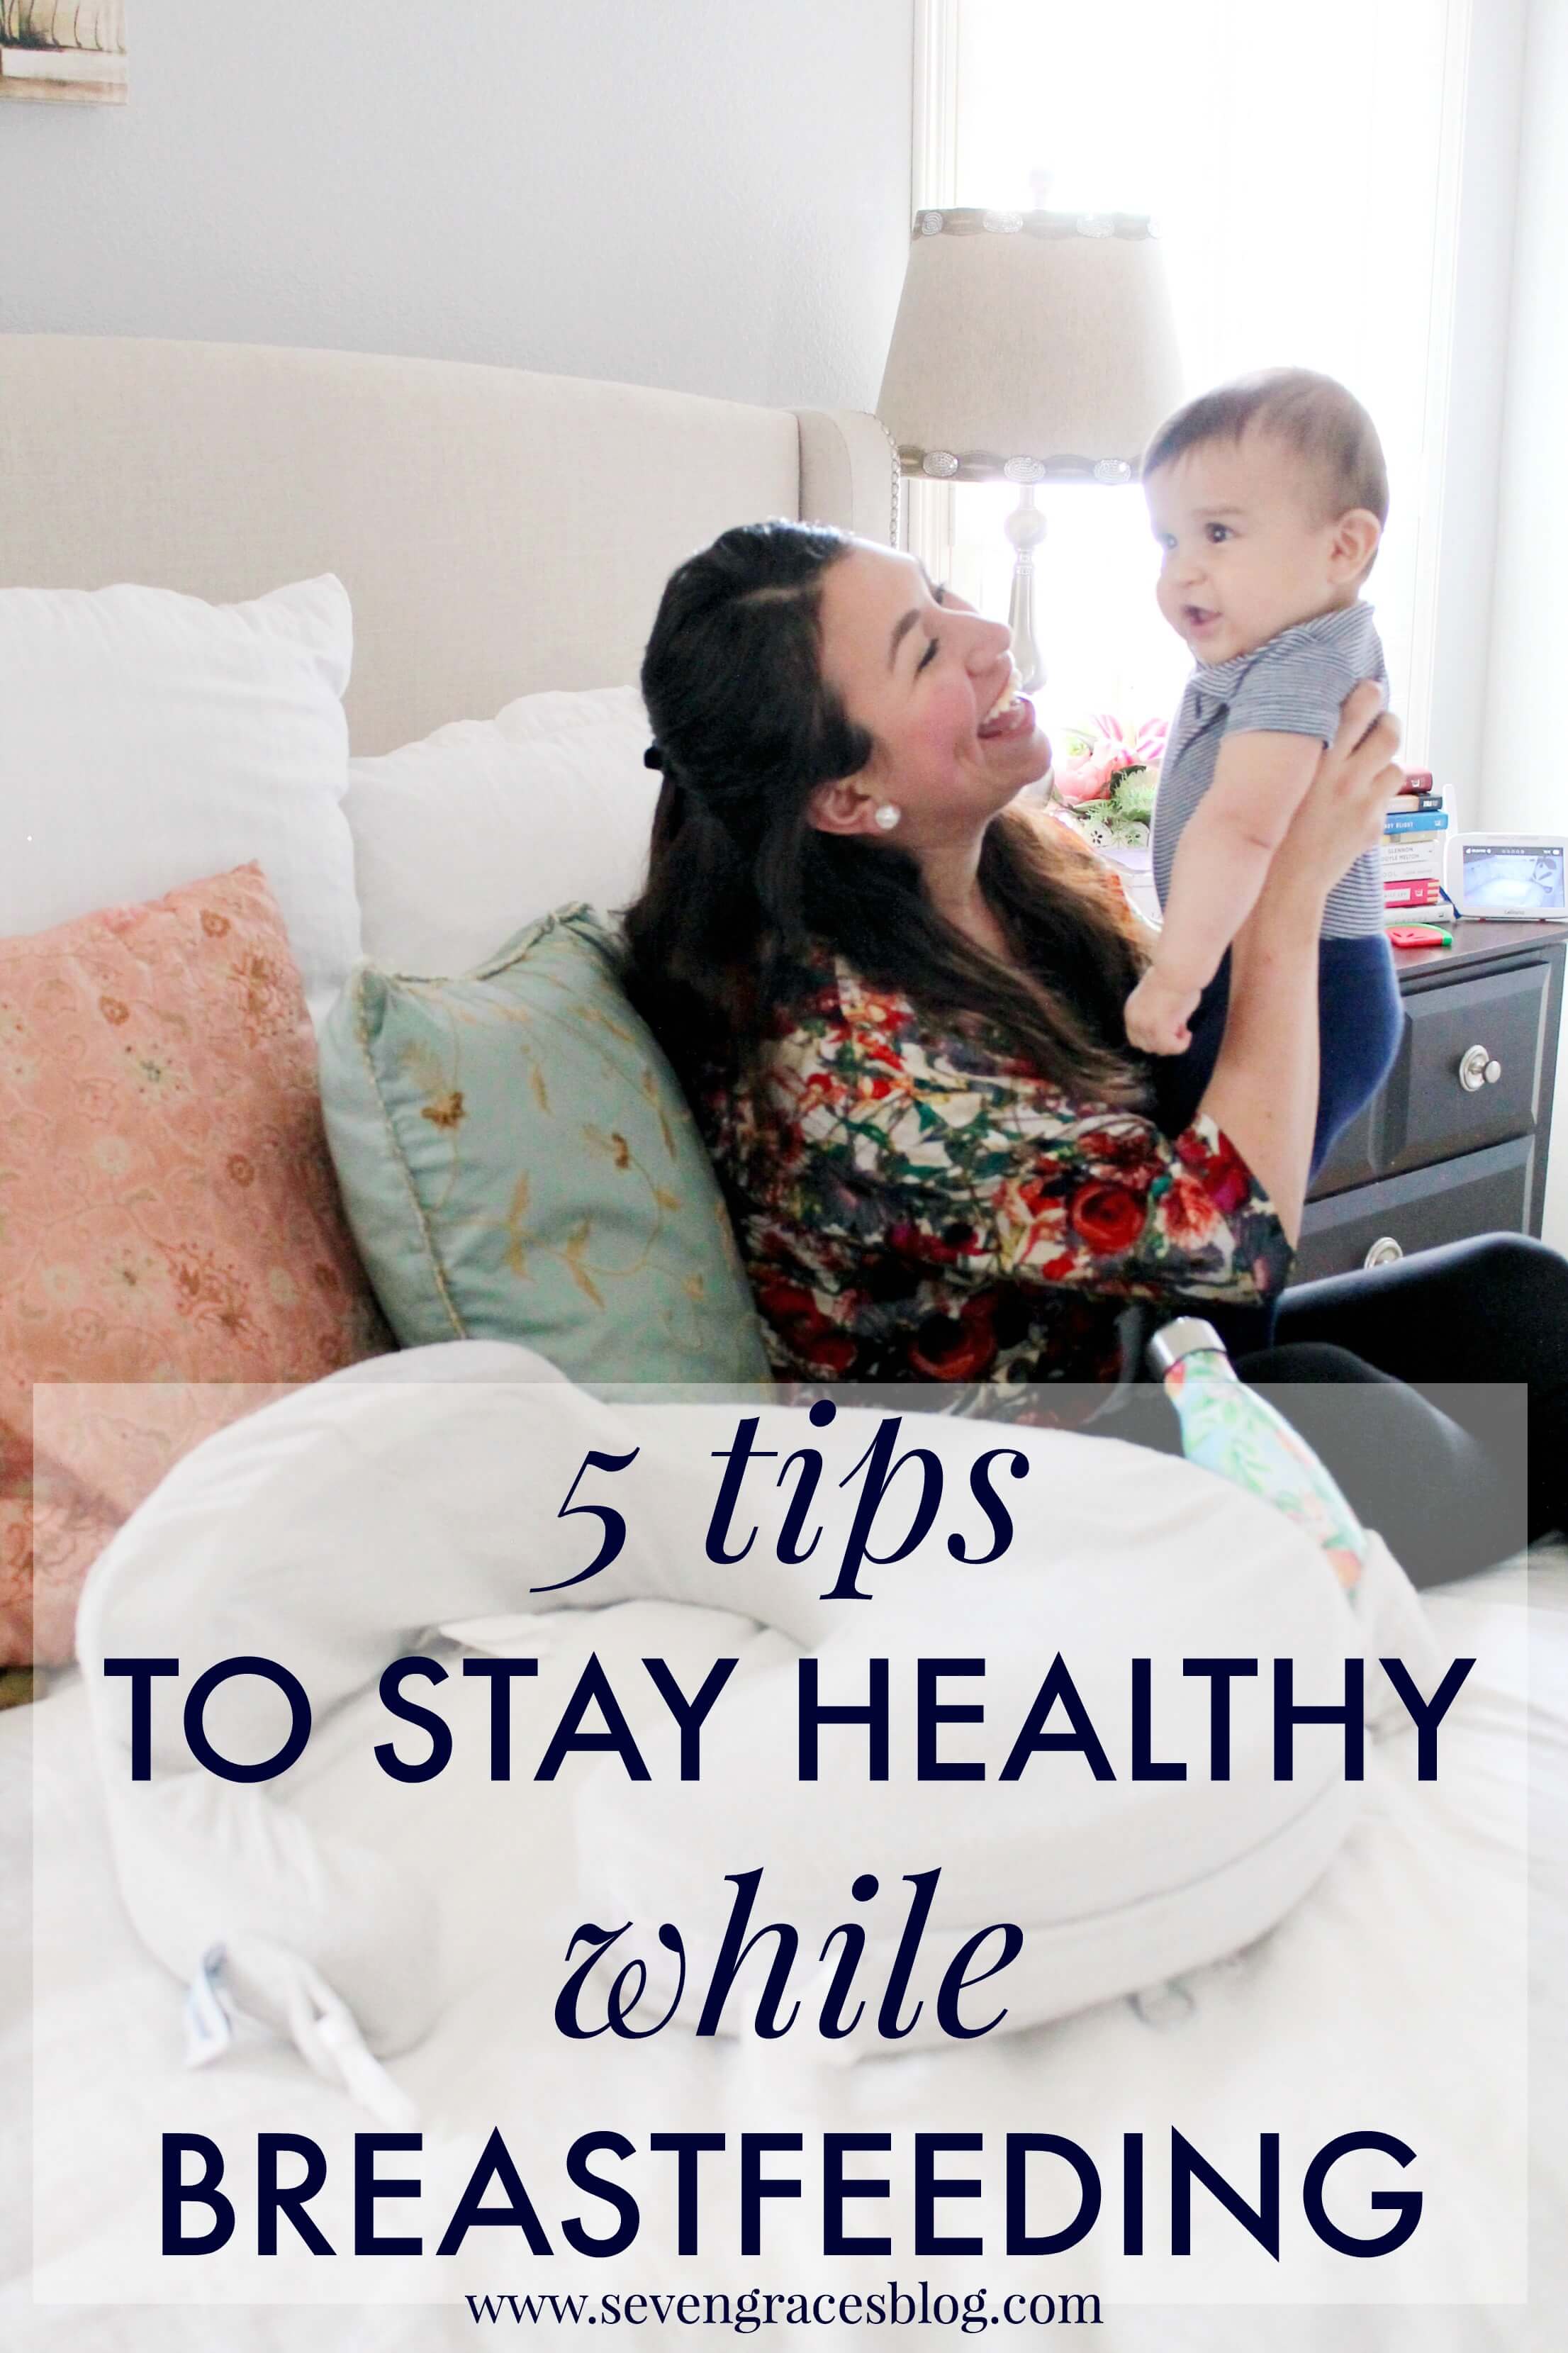 5 Tips to stay healthy while breastfeeding. Practical tips that will help you for the long-haul. Breastfeeding tips you need to know.